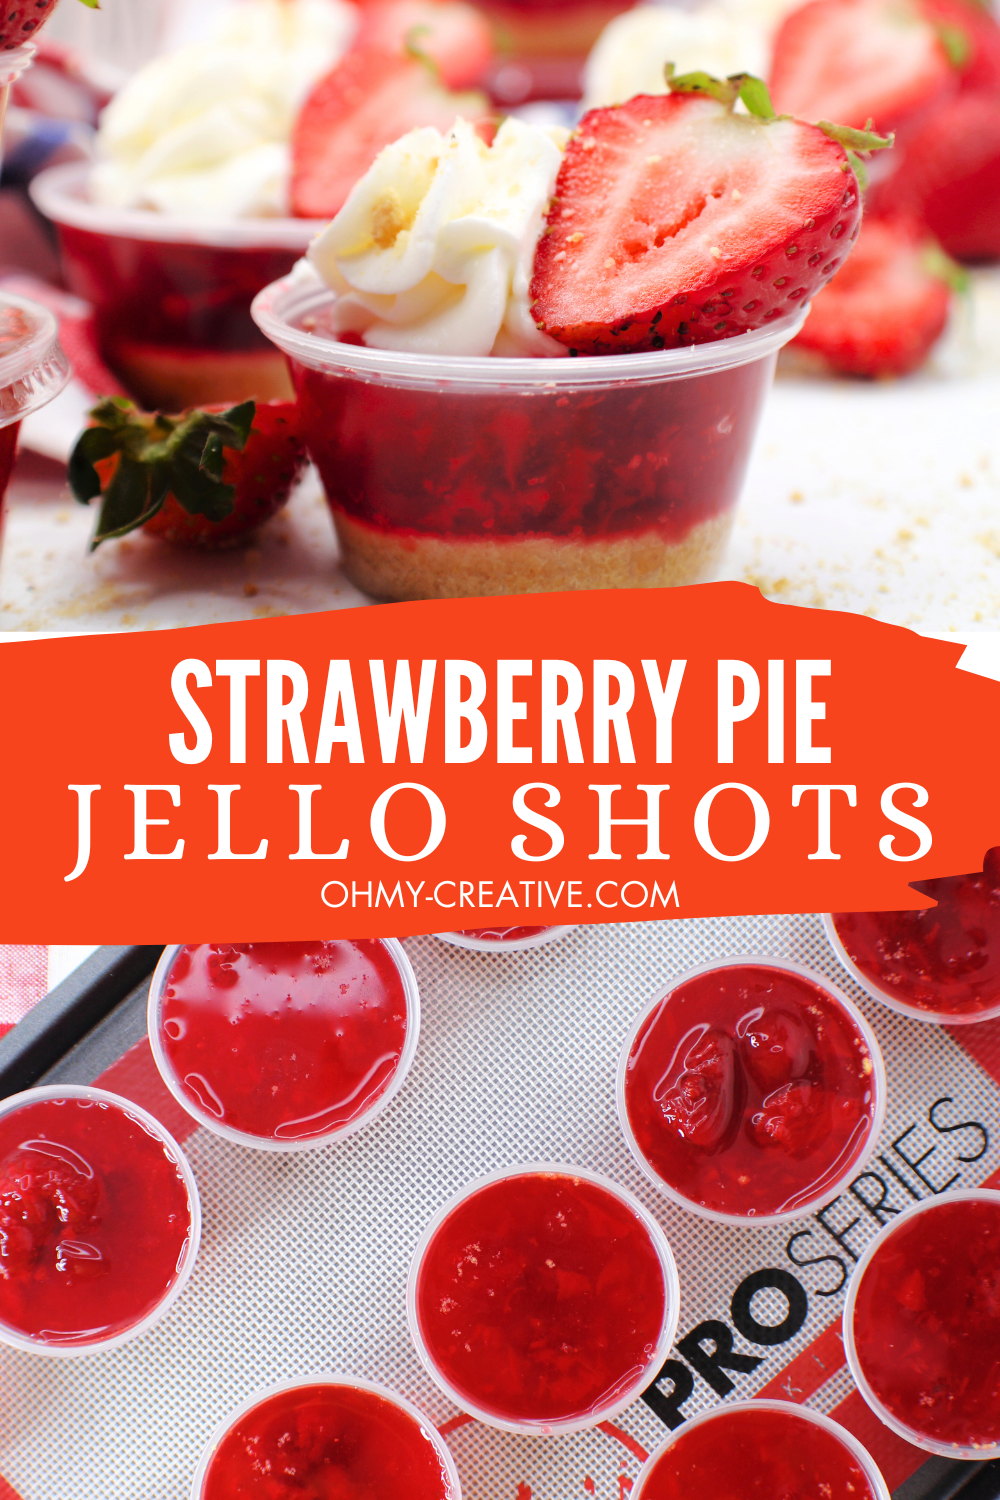 A tasty strawberry jello shot topped with whipped cream and a slice of strawberry. And a second image of a tray of strawberry jello shots with no topping.